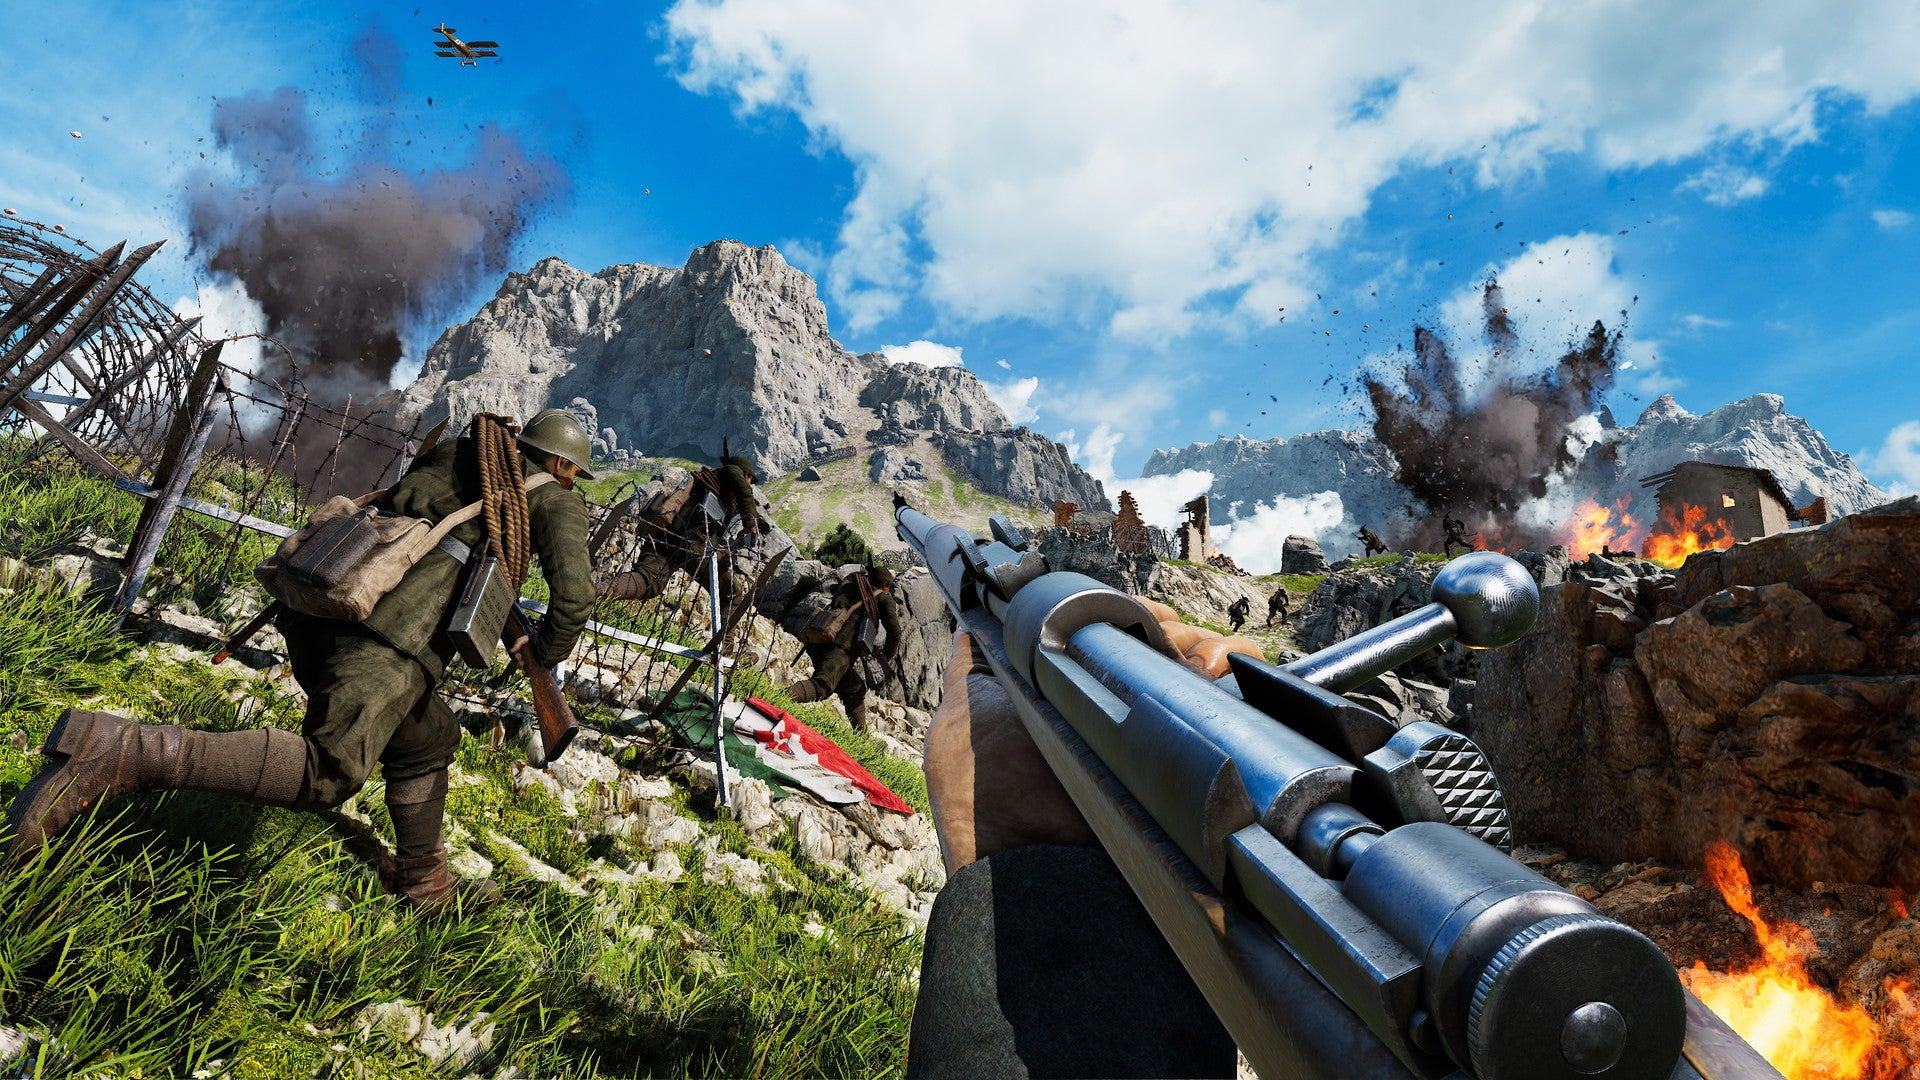 Isonzo - a PR shot from POV perspective of the player and teammates running up a sunny mountainside amidst explosions